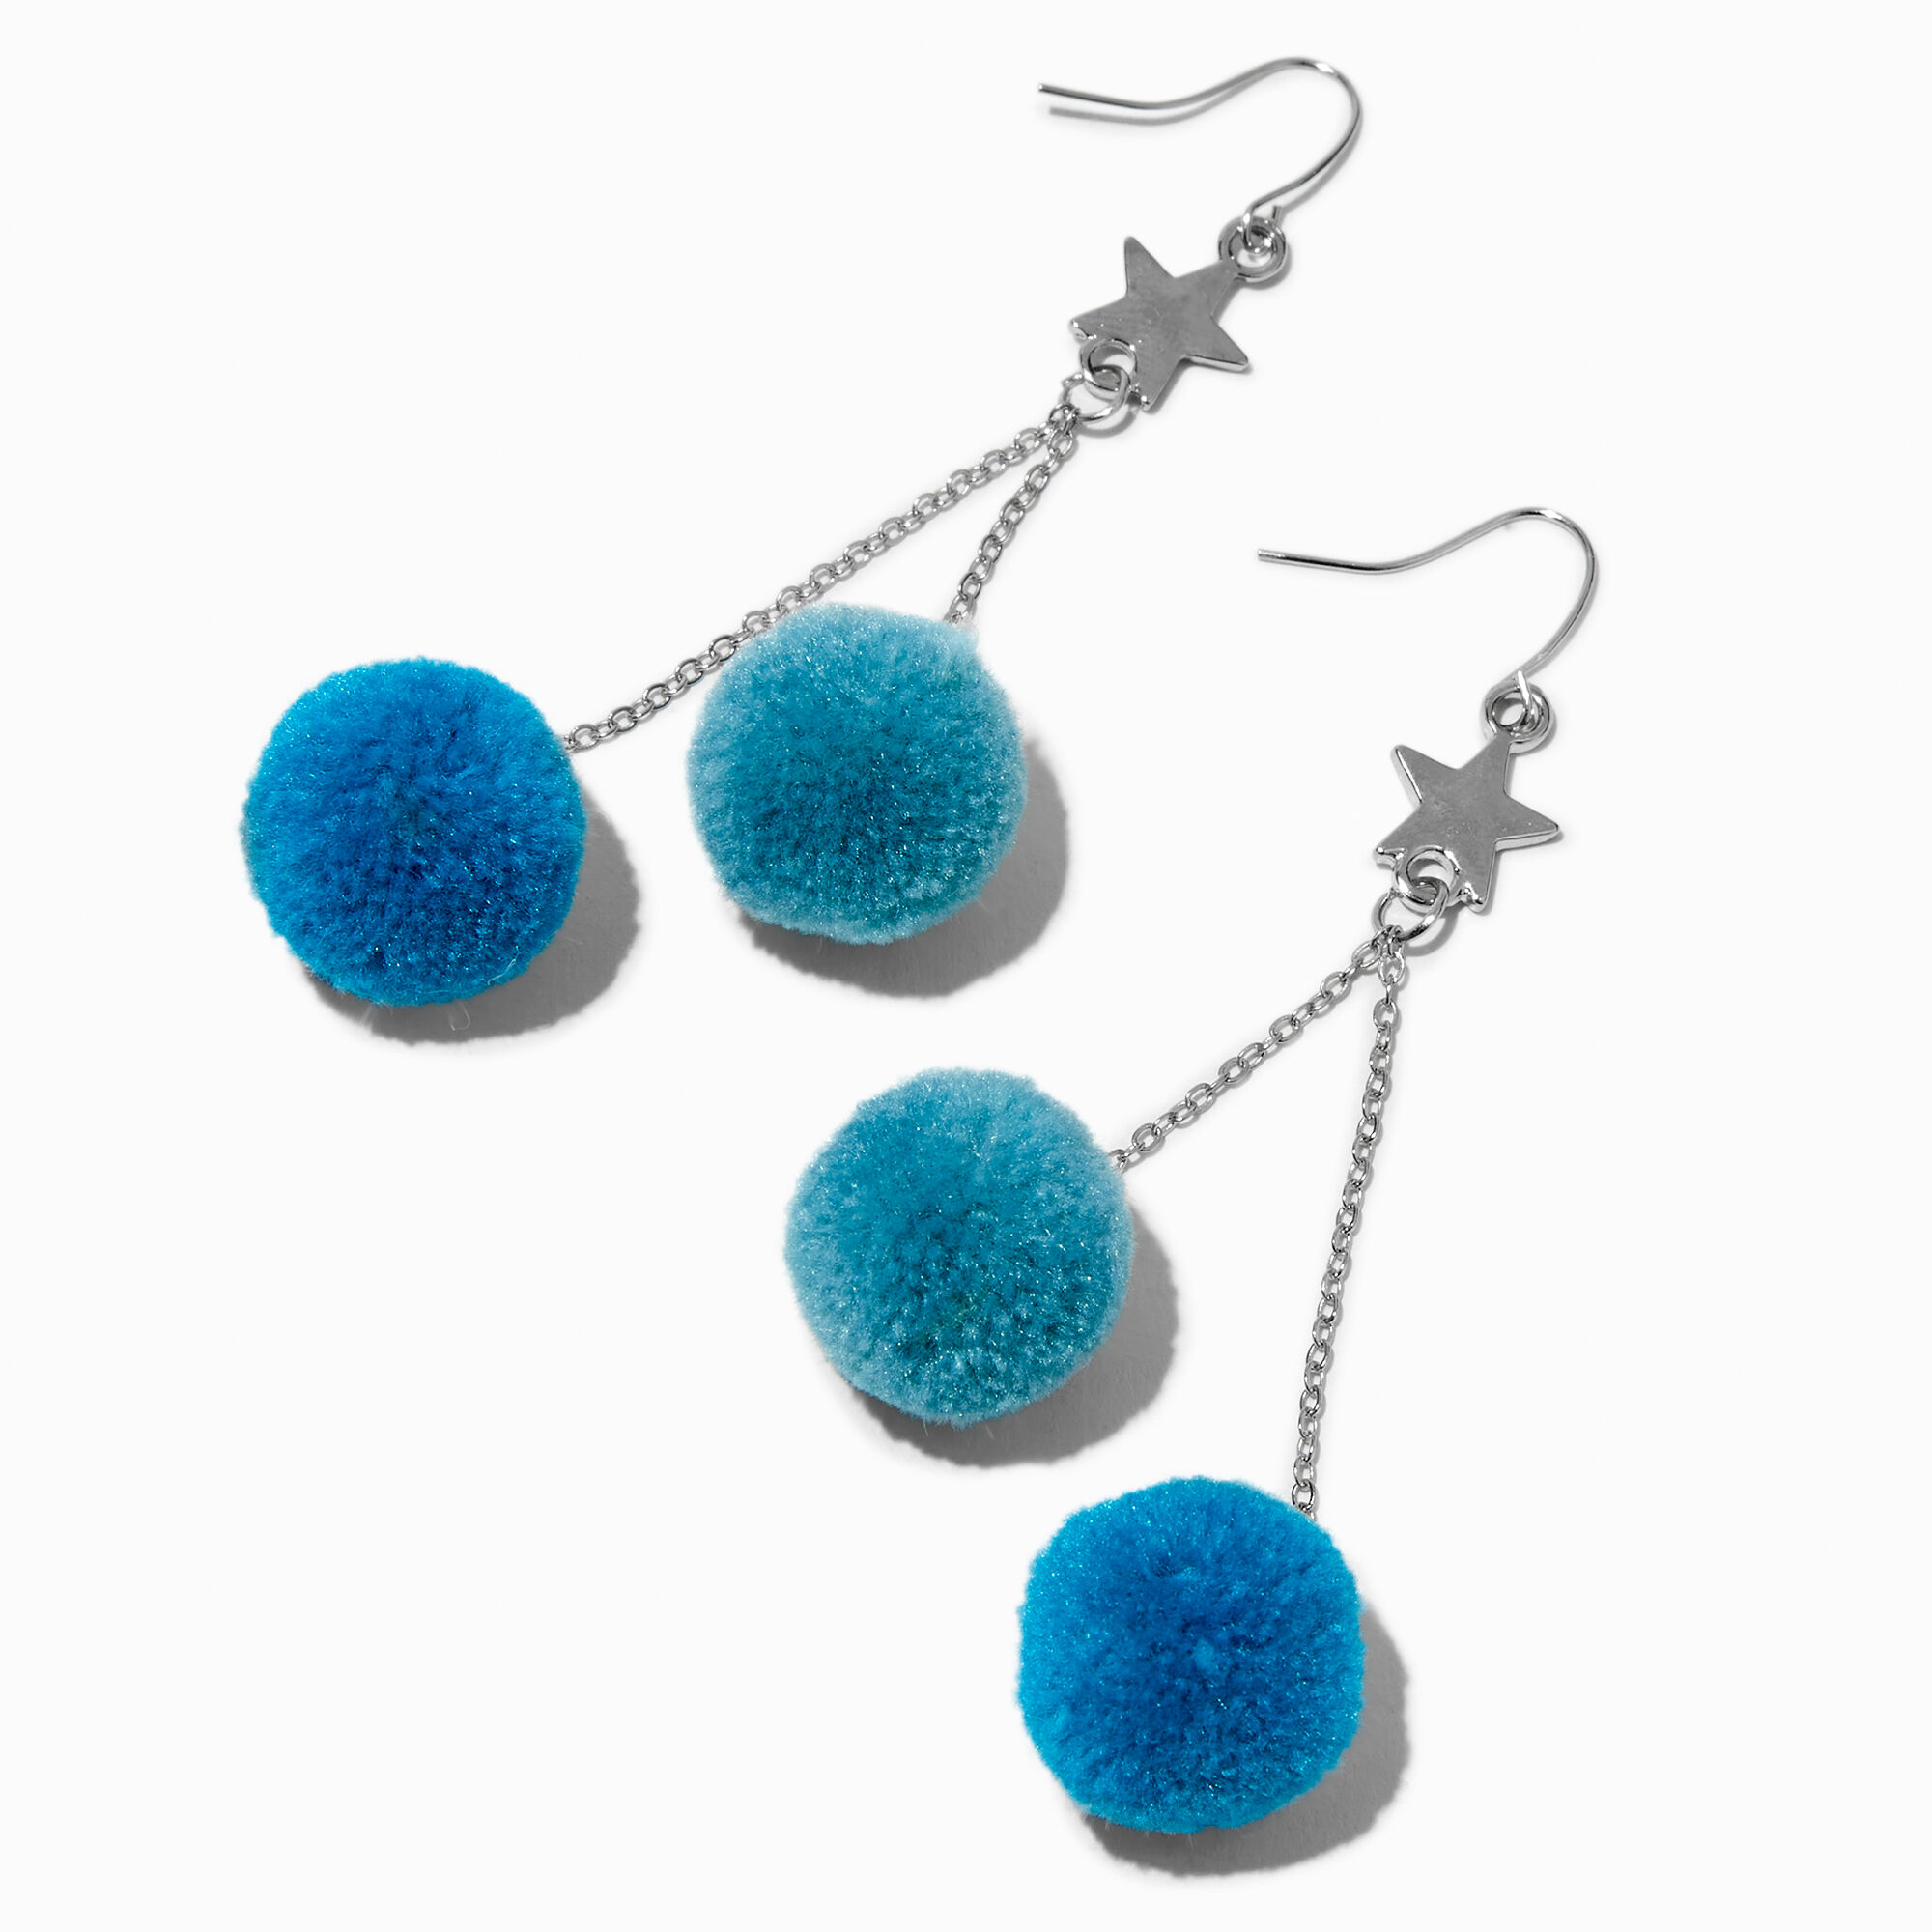 View Claires Double Pom 3 SilverTone Drop Earrings Blue information